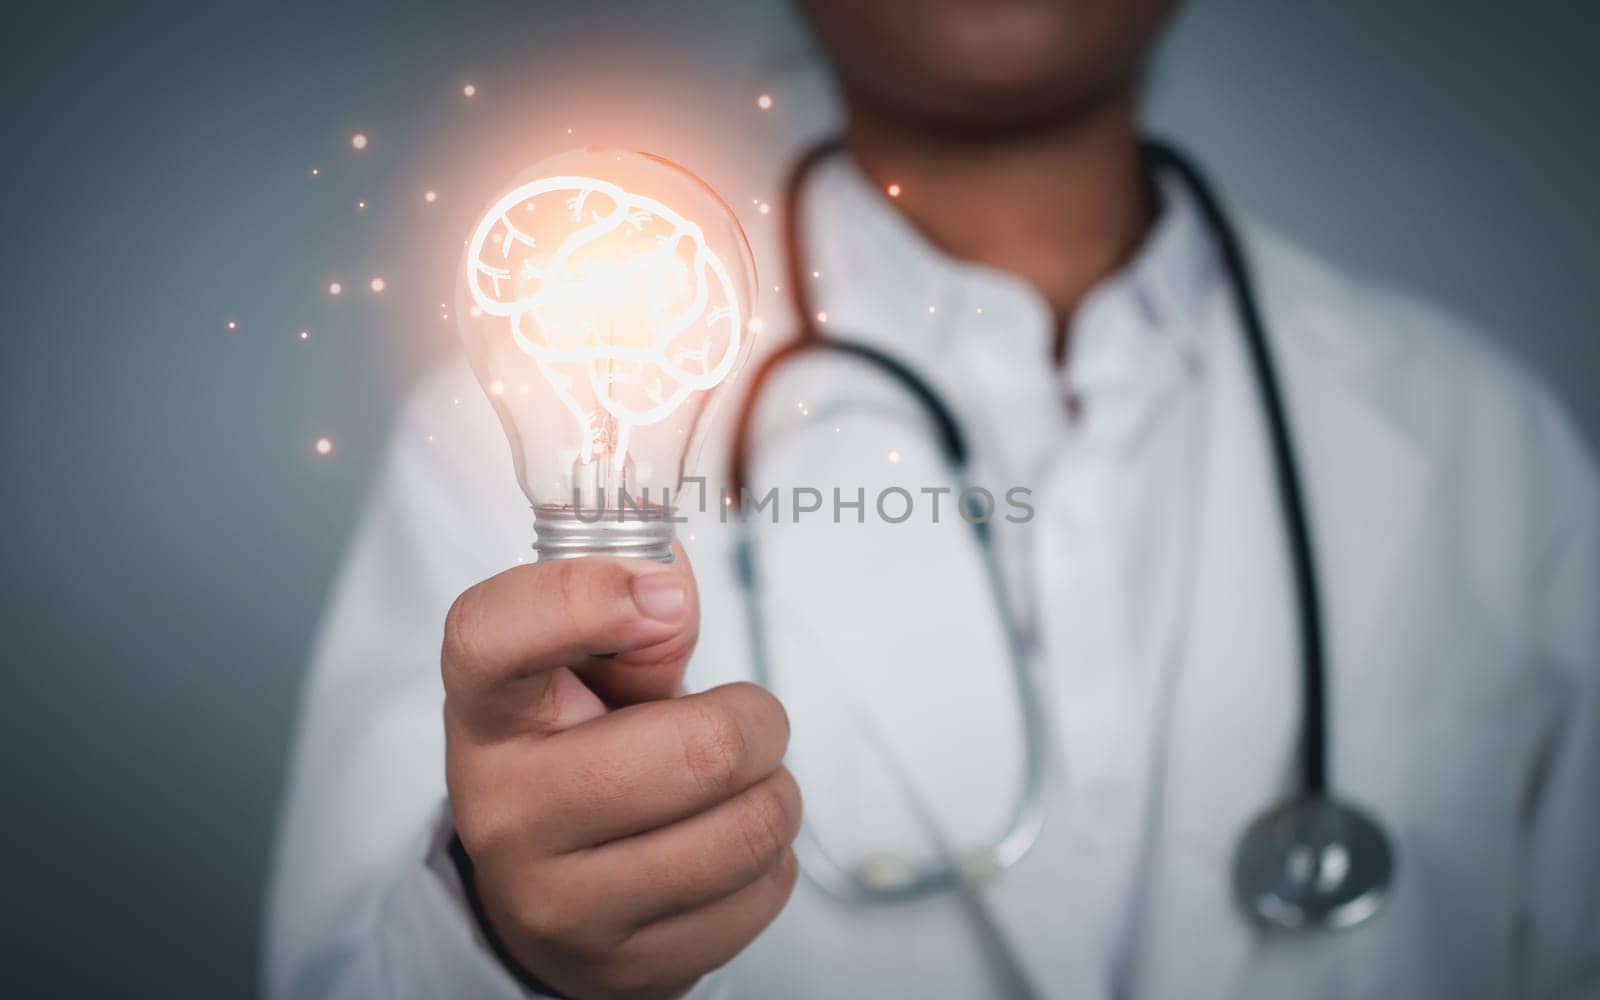 Doctor holding Light bulb with brain icon inside on grey background. Medical health care and medical services. Technology of medical service.